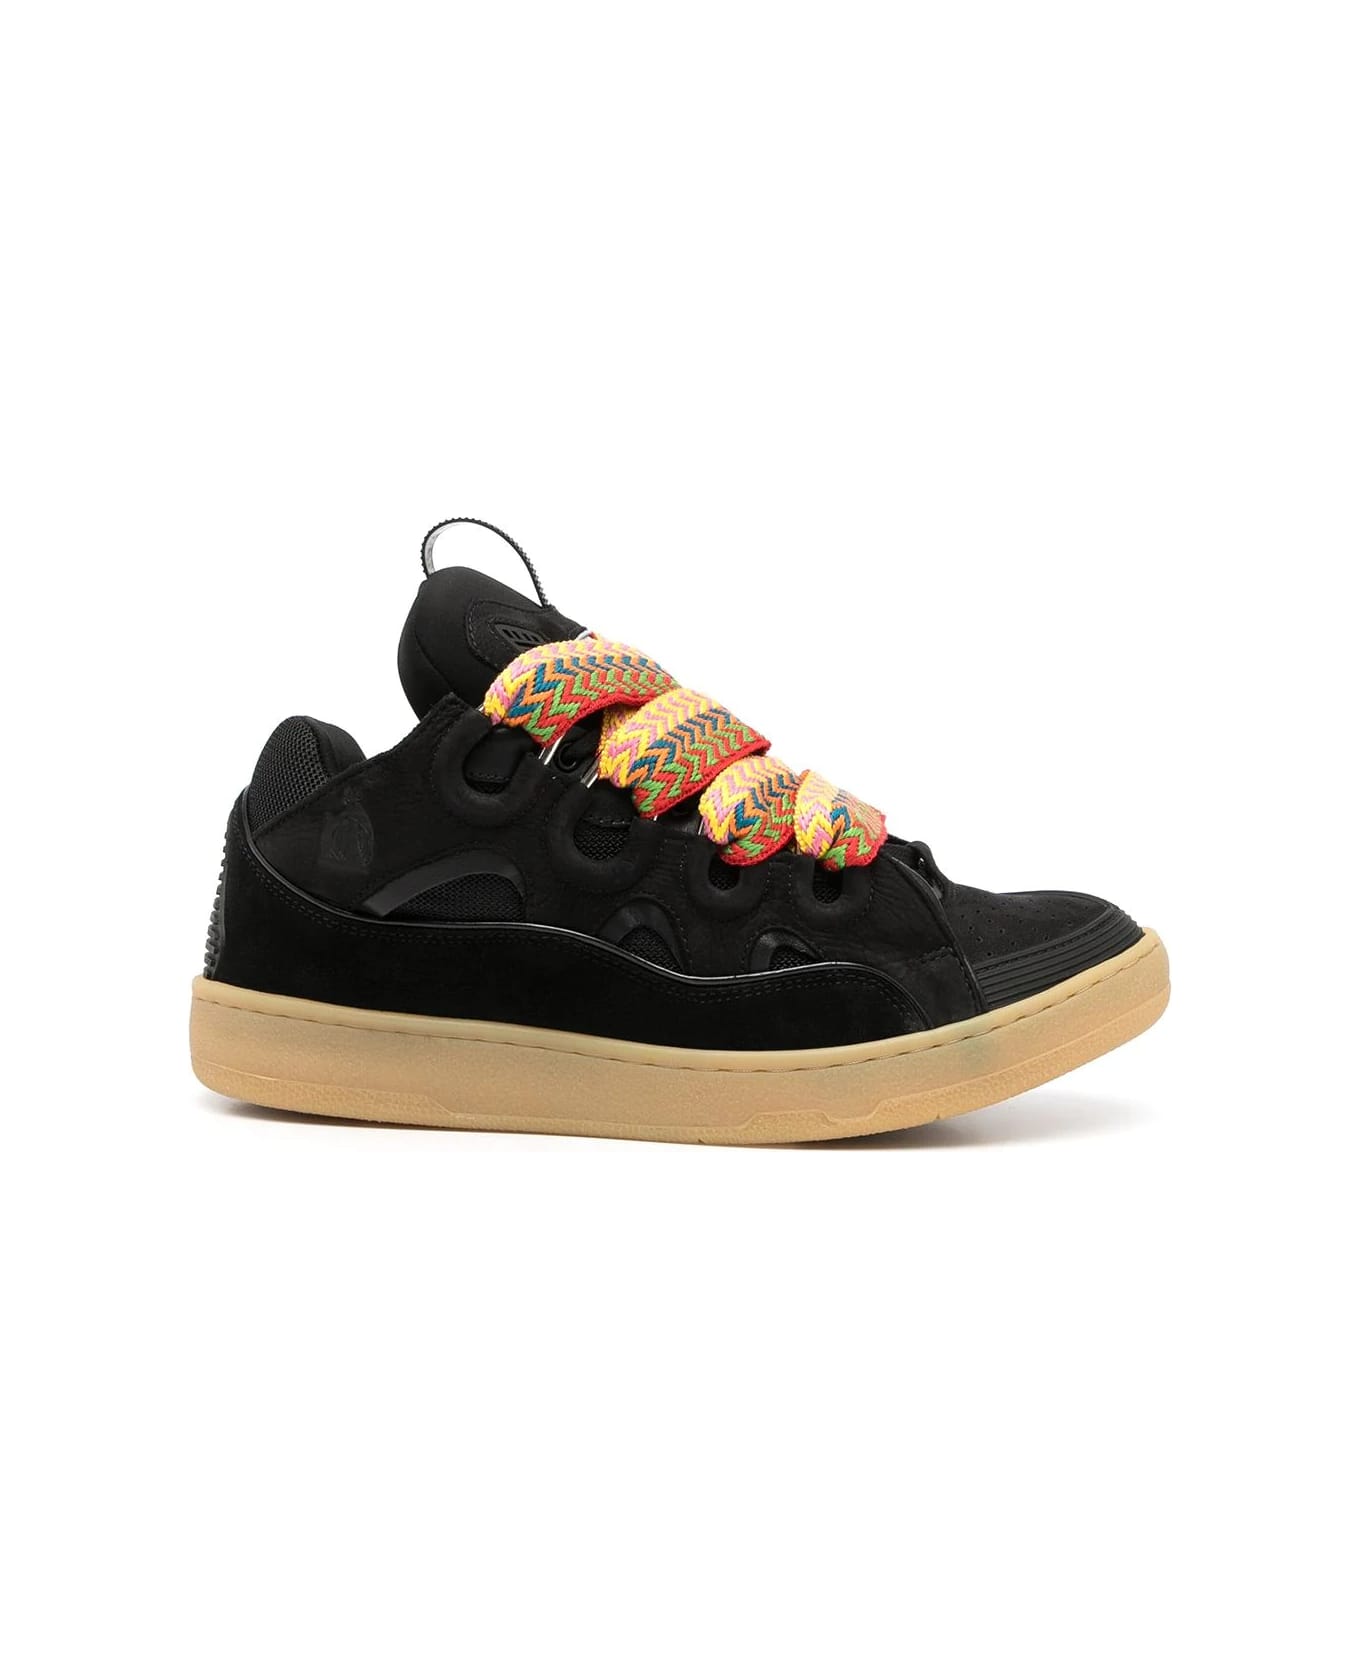 Lanvin "curb" Sneakers In Black Leather - Black スニーカー